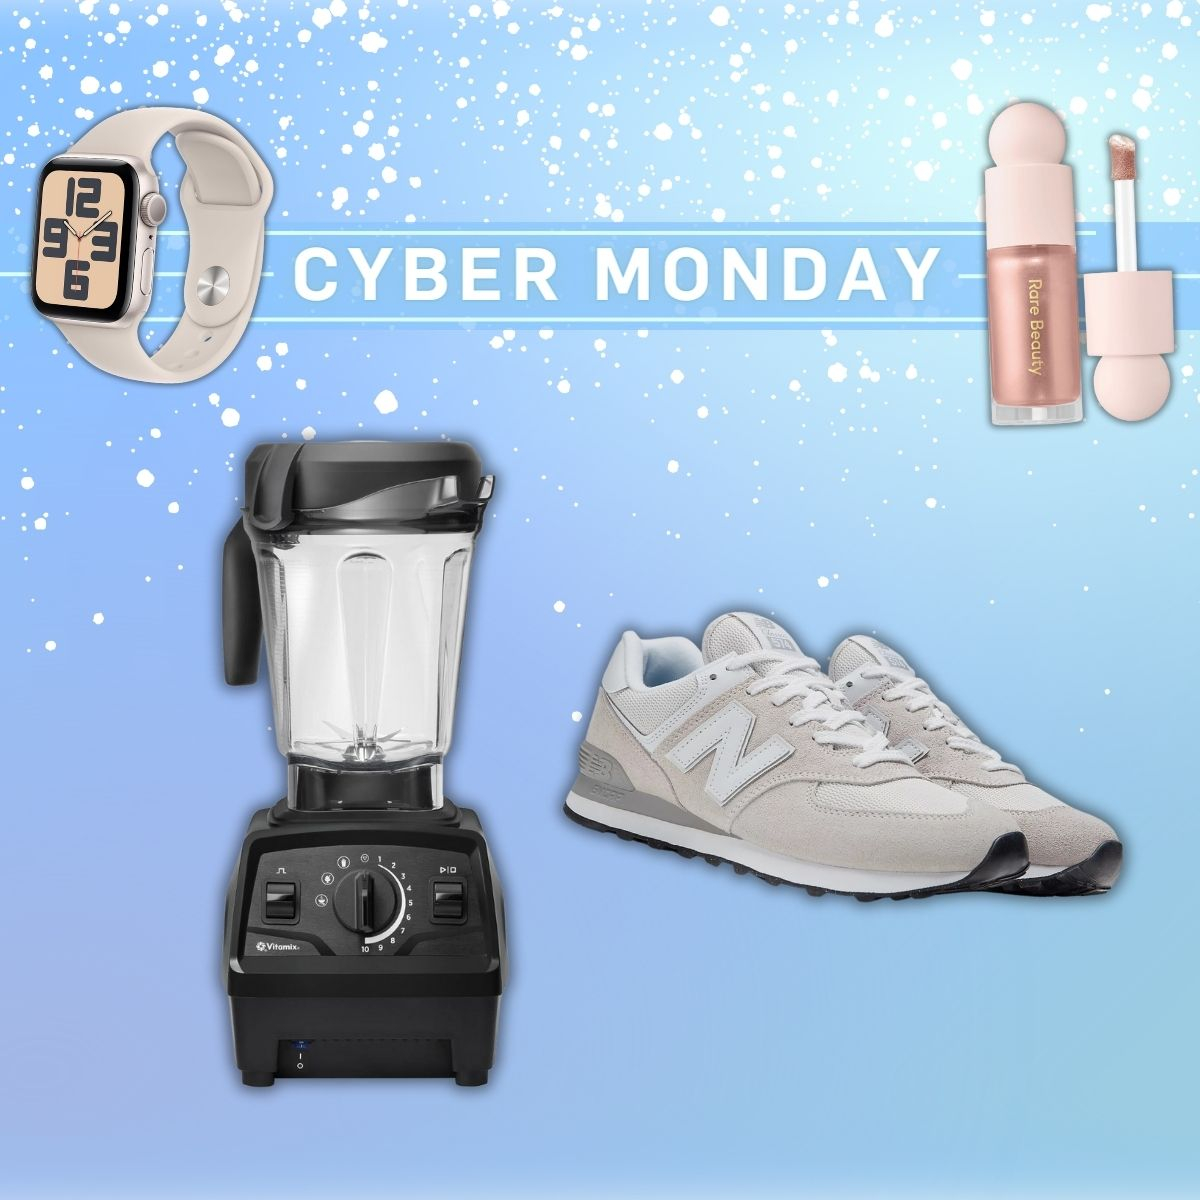 Best Cyber Monday Sales  60% Off The Best Gifts Now!